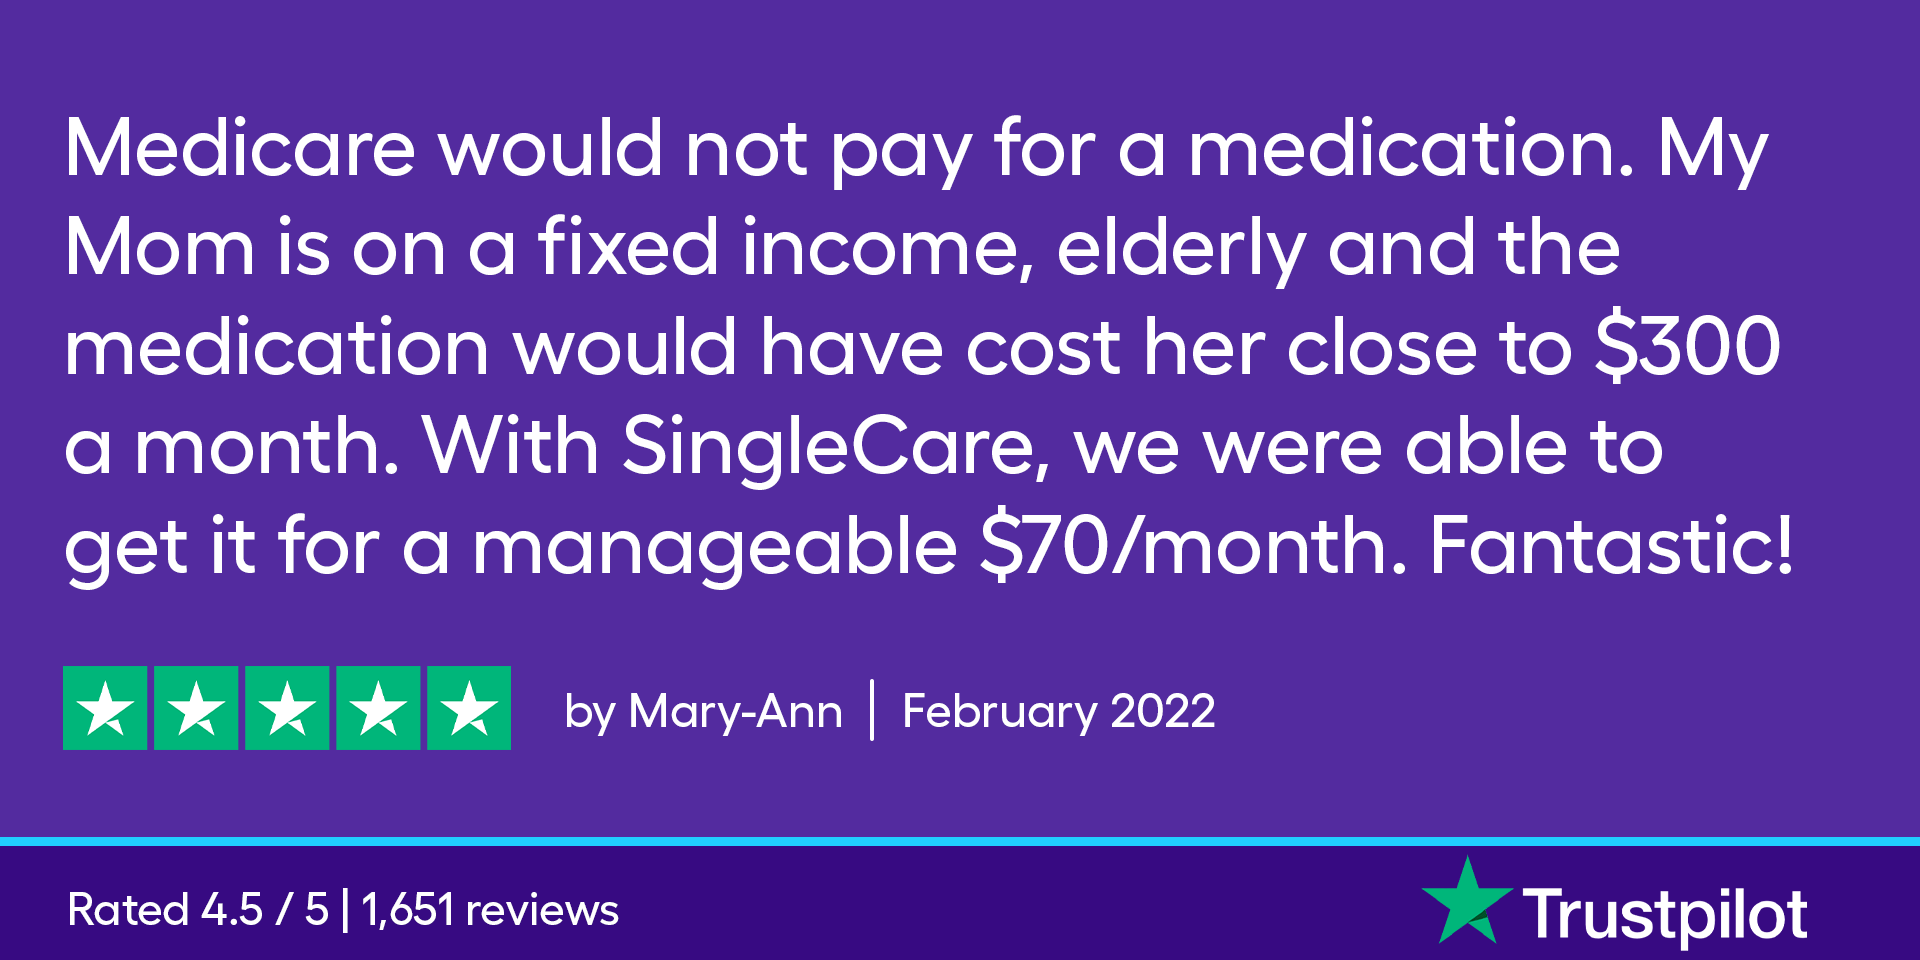 Medicare would not pay for a medication. My Mom is on a fixed income, elderly and the medication would have cost her close to $300 a month. With SingleCare, we were able to get it for a manageable $70/month. Fantastic!